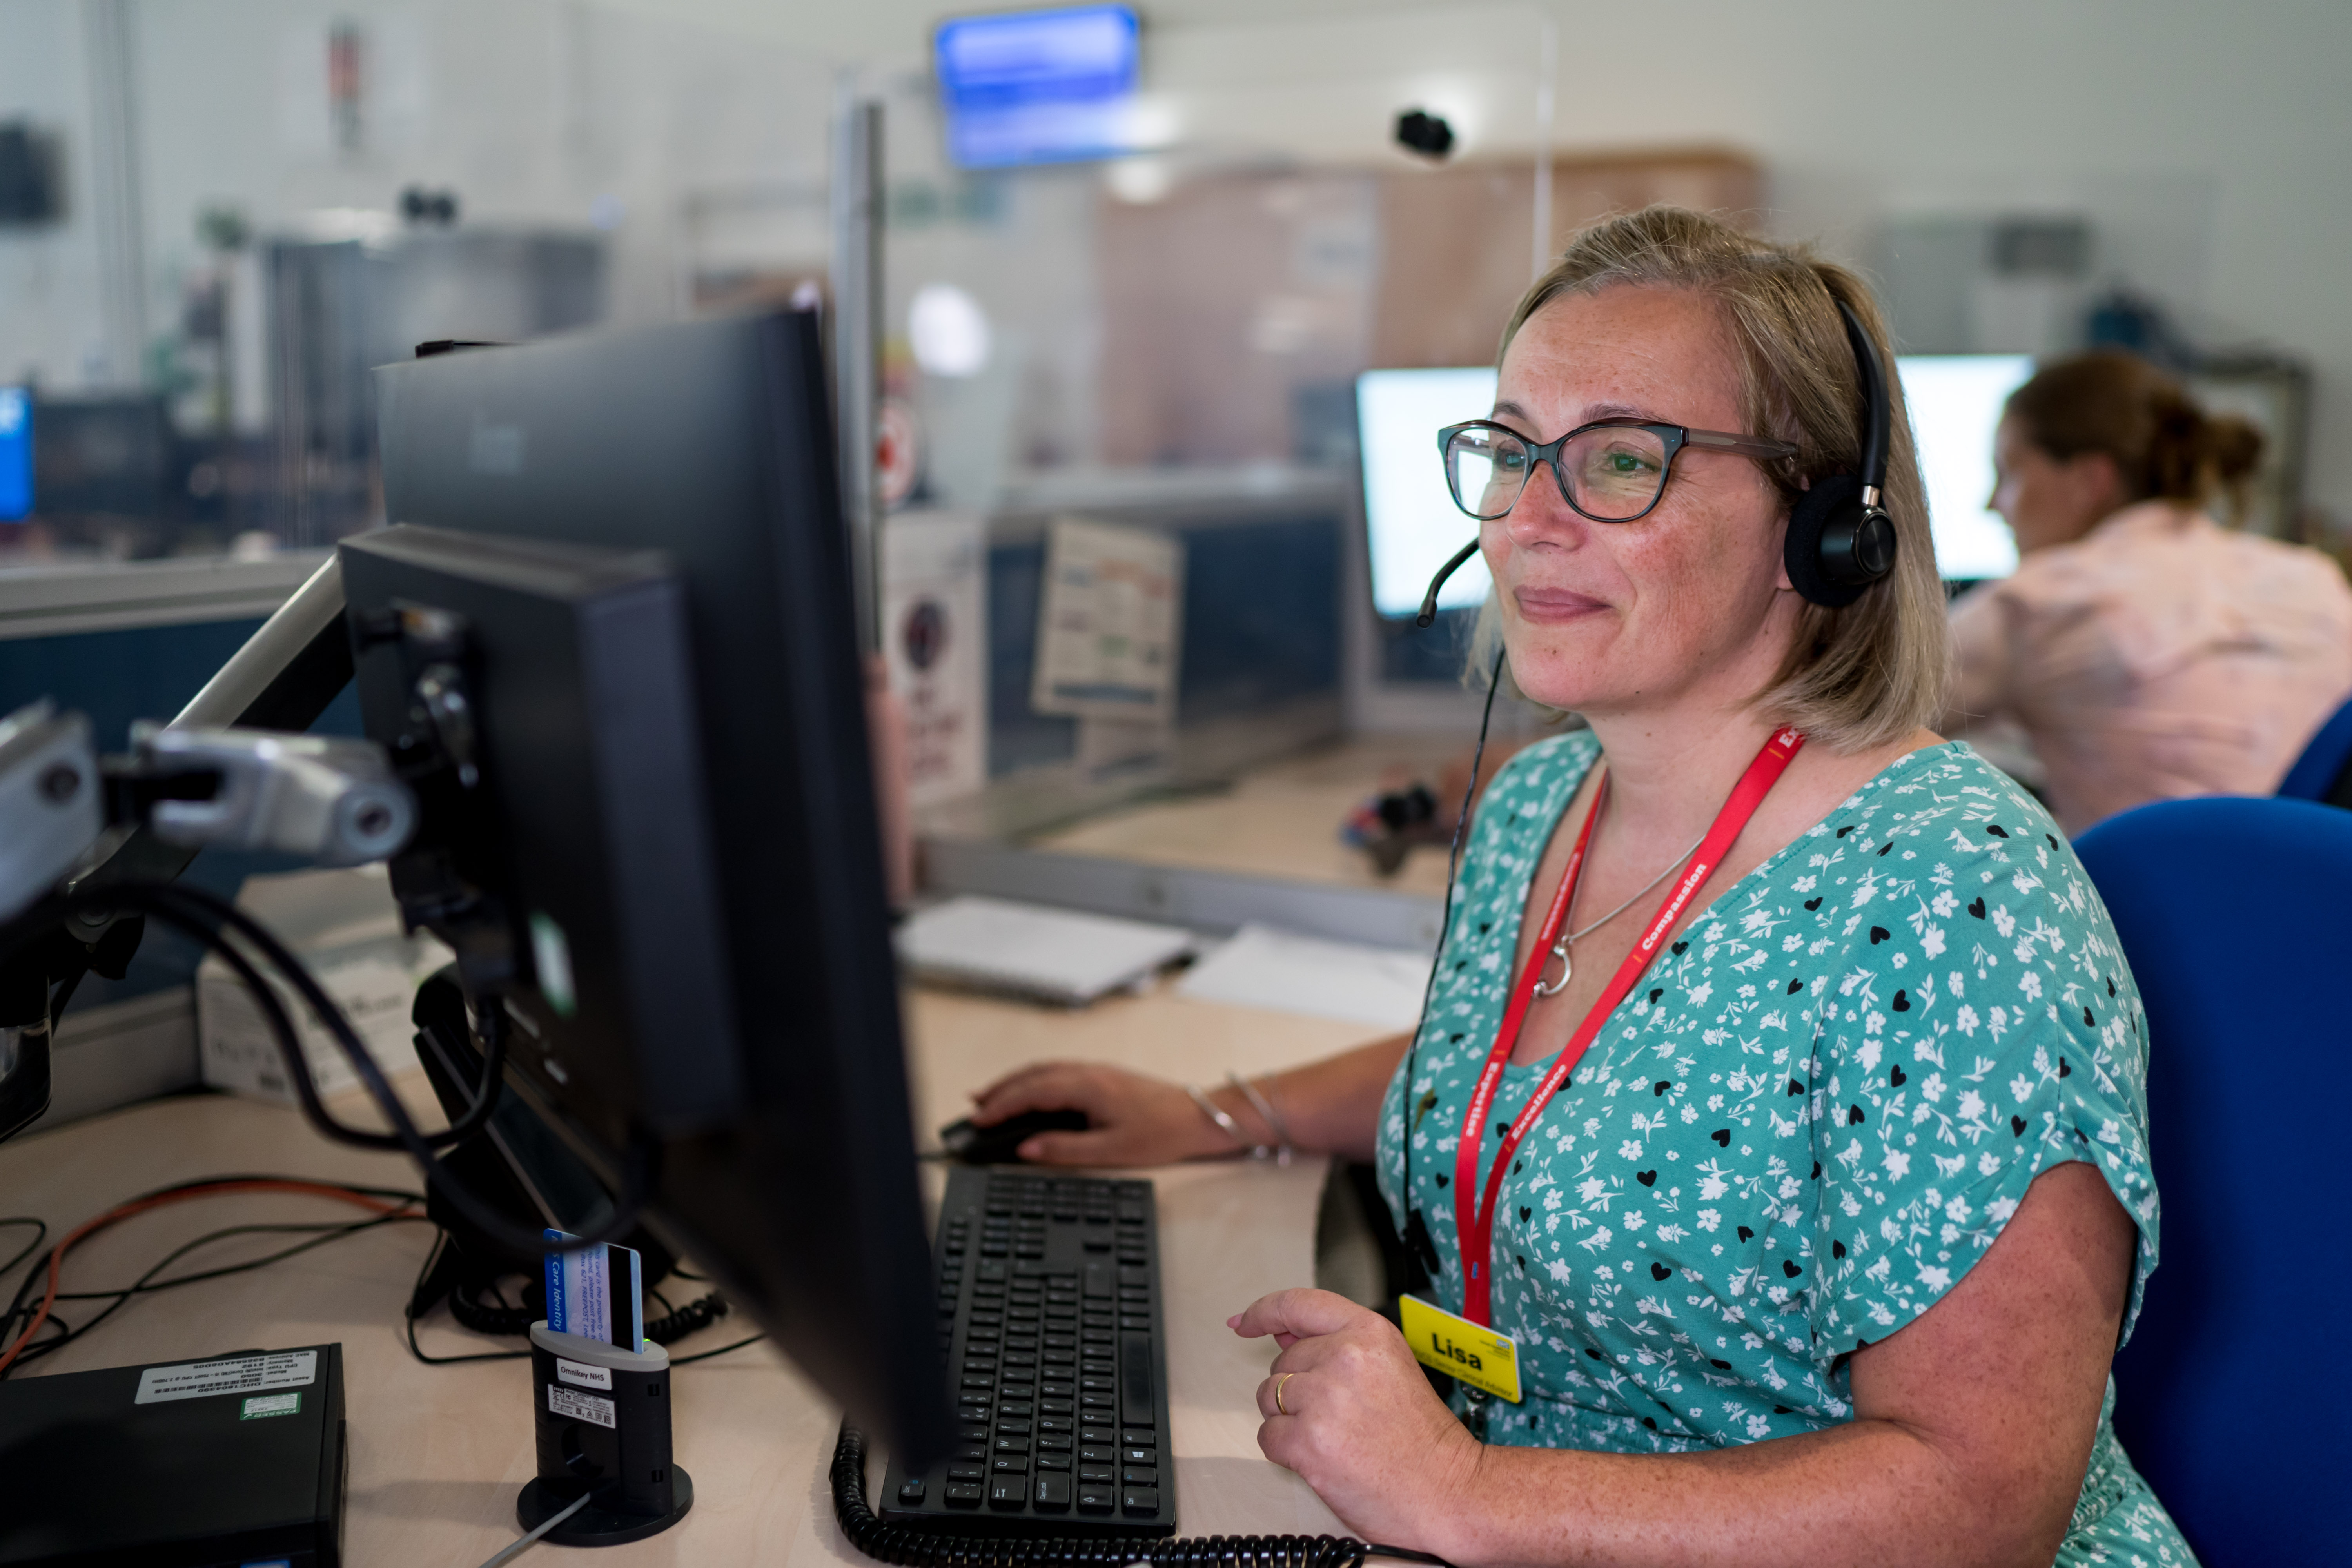 Dorset leads the way in answering NHS 111 calls